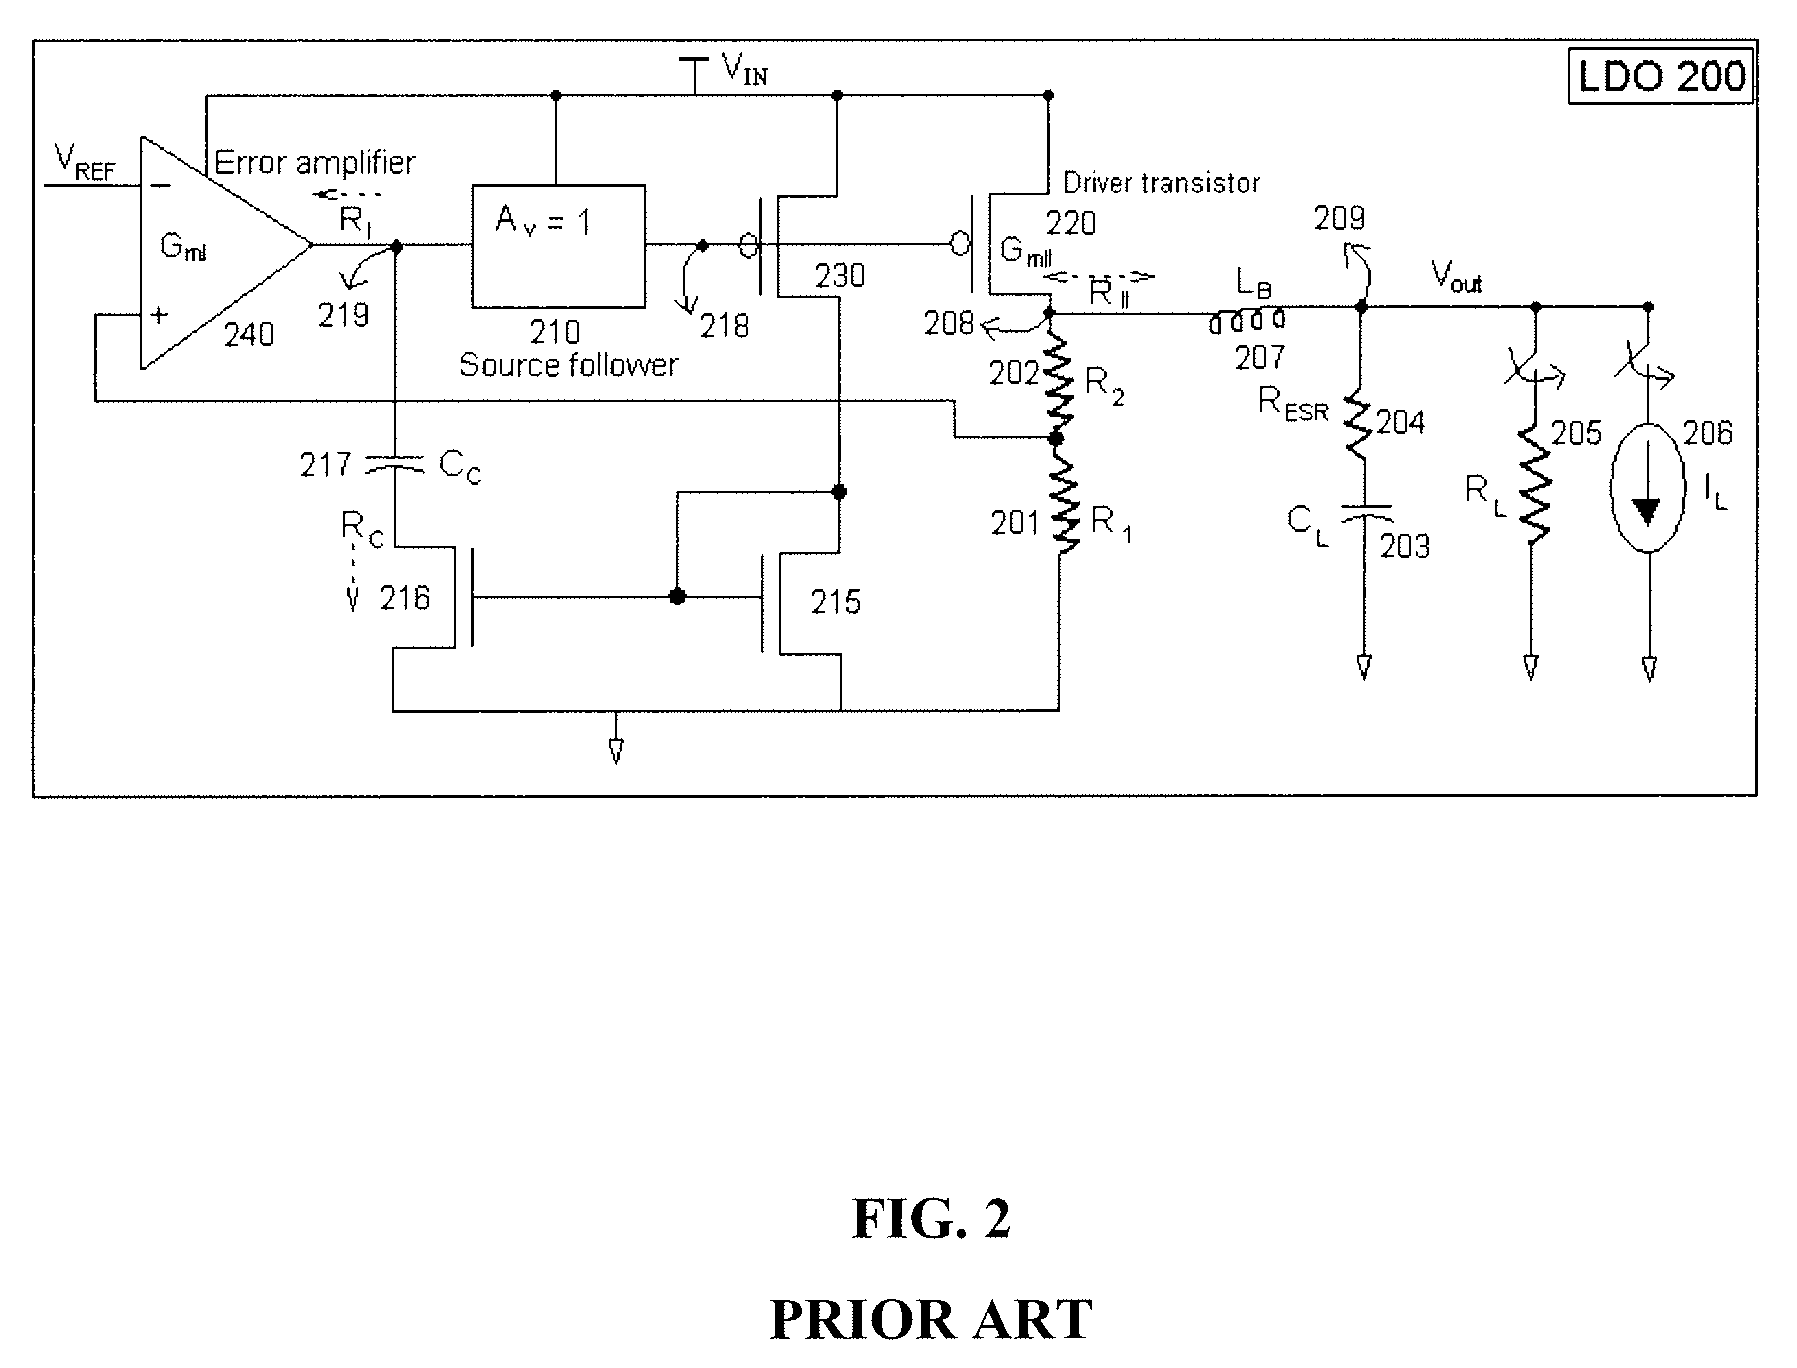 Low dropout regulator with stability compensation